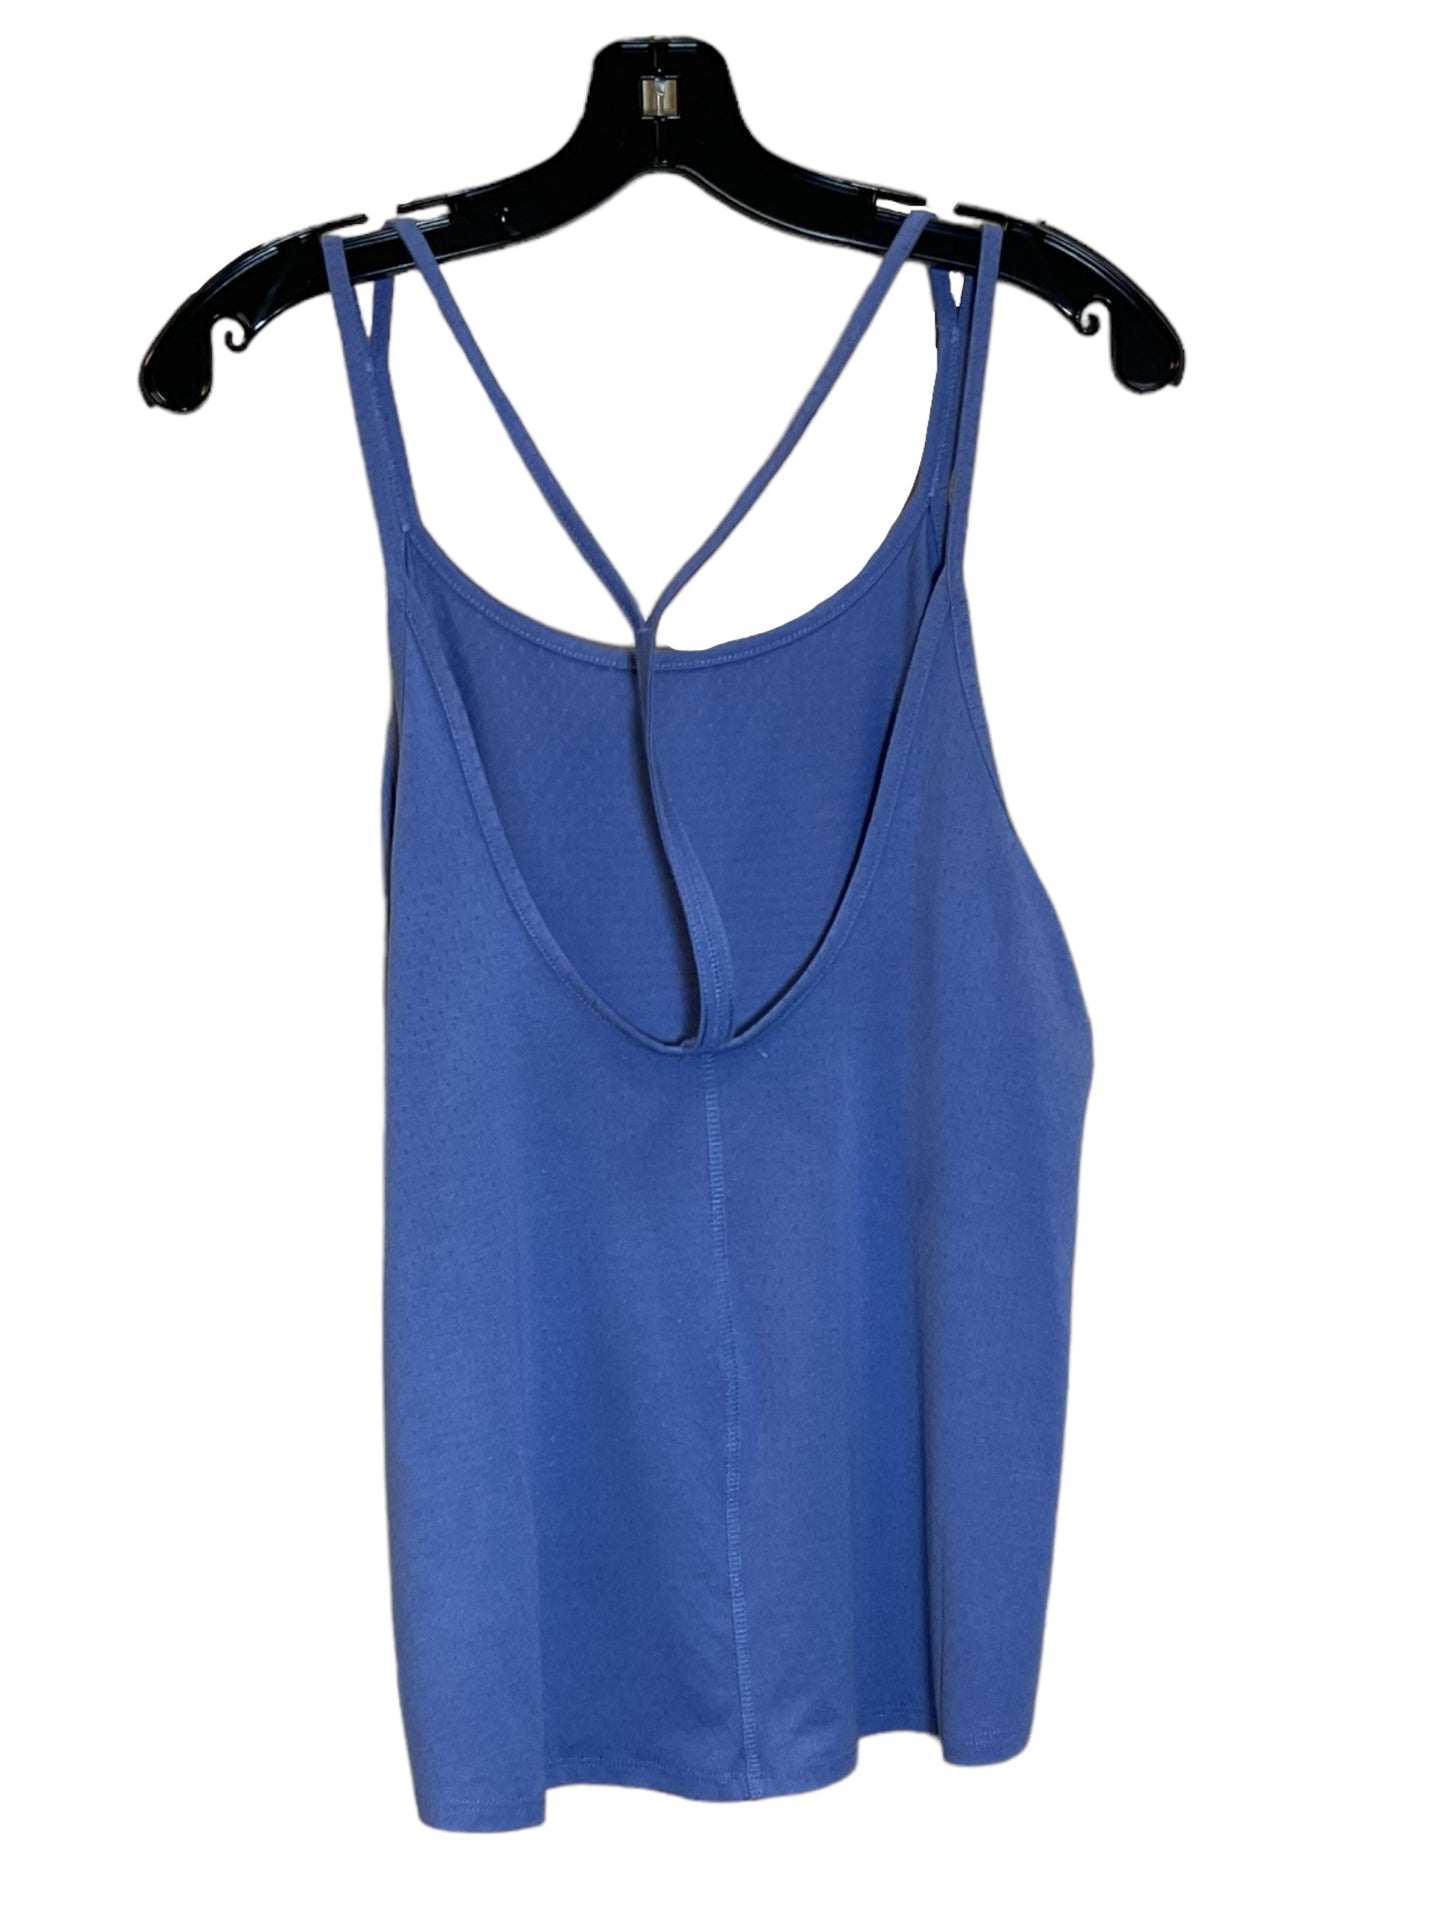 Athletic Tank Top By Zyia  Size: 1x